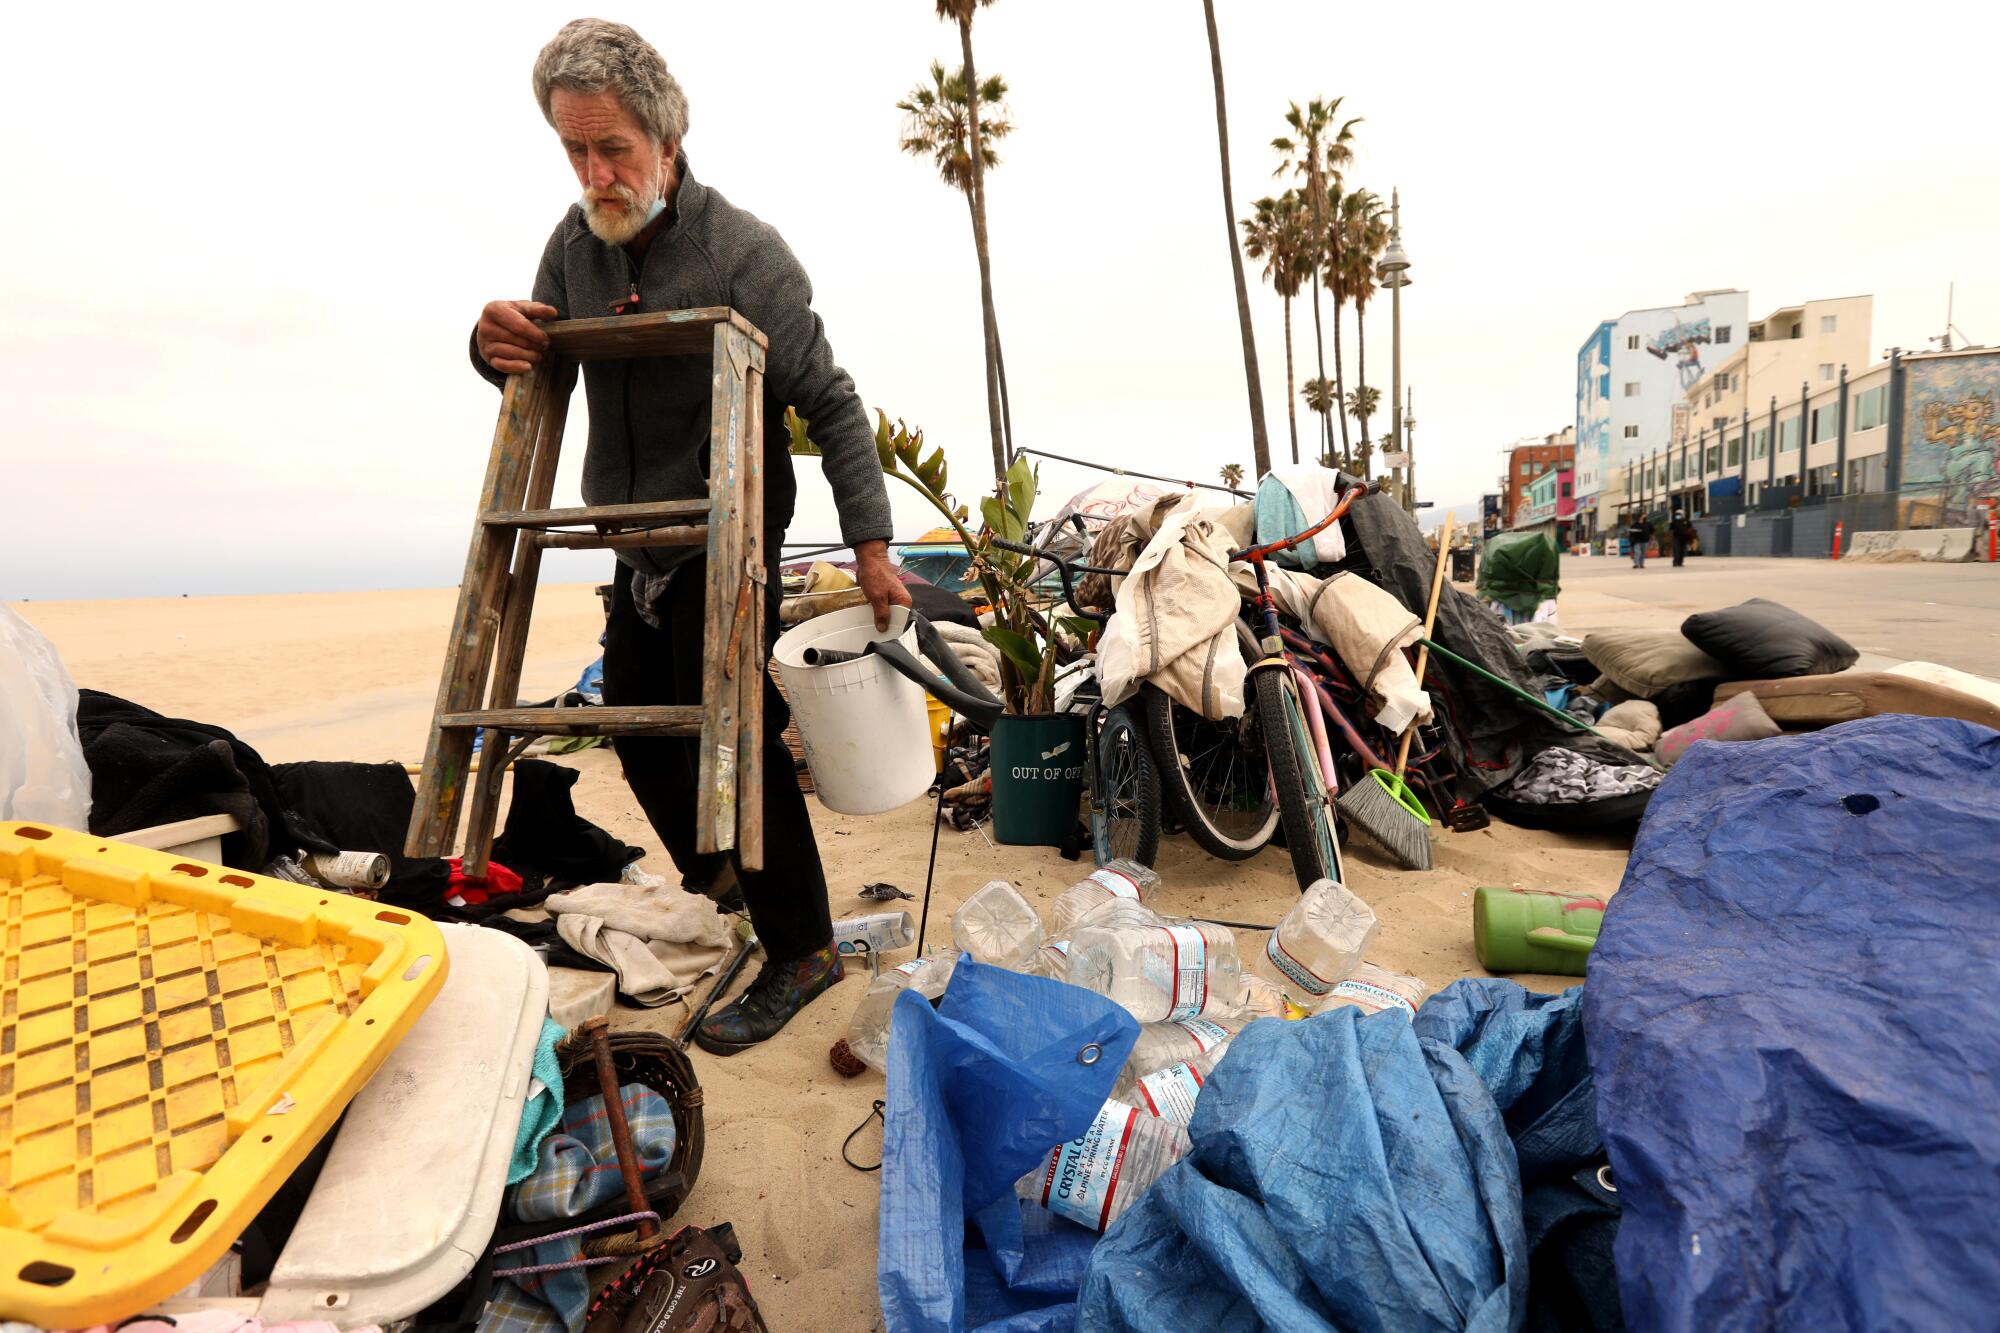 A man gathers belongings from a camp